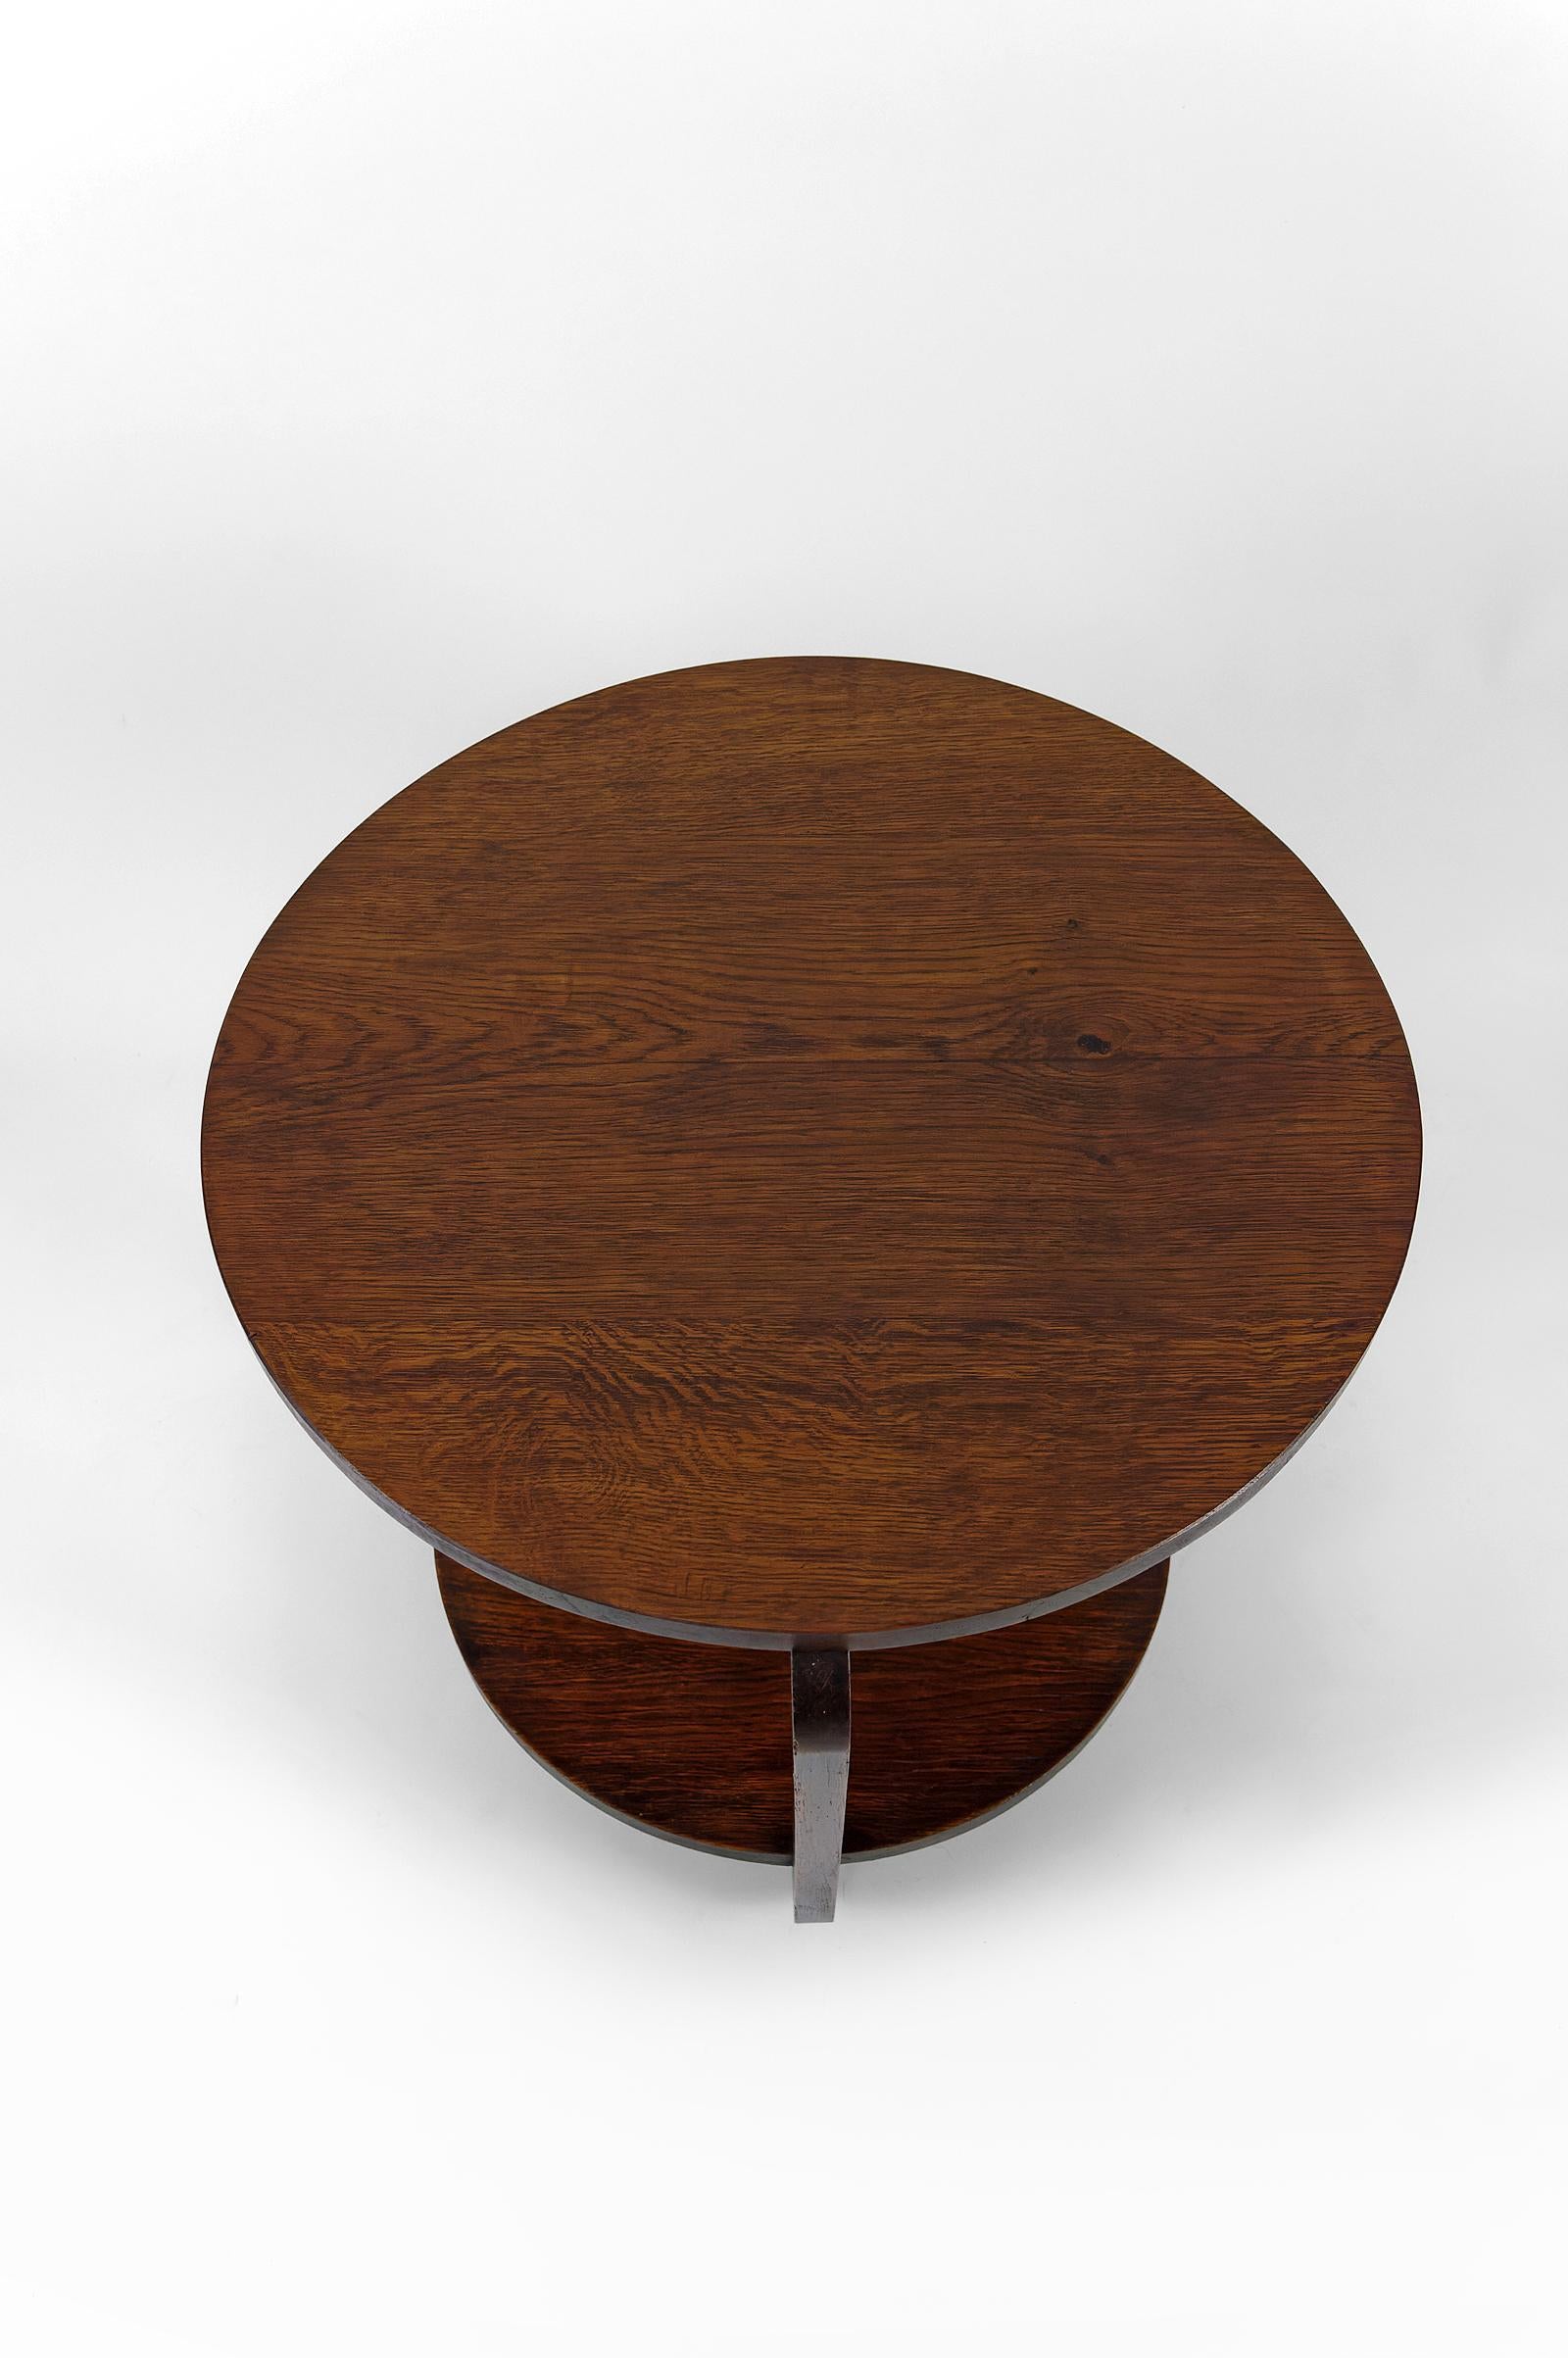 Modernist Art Deco round pedestal table in patinated oak, France, Circa 1930 For Sale 4